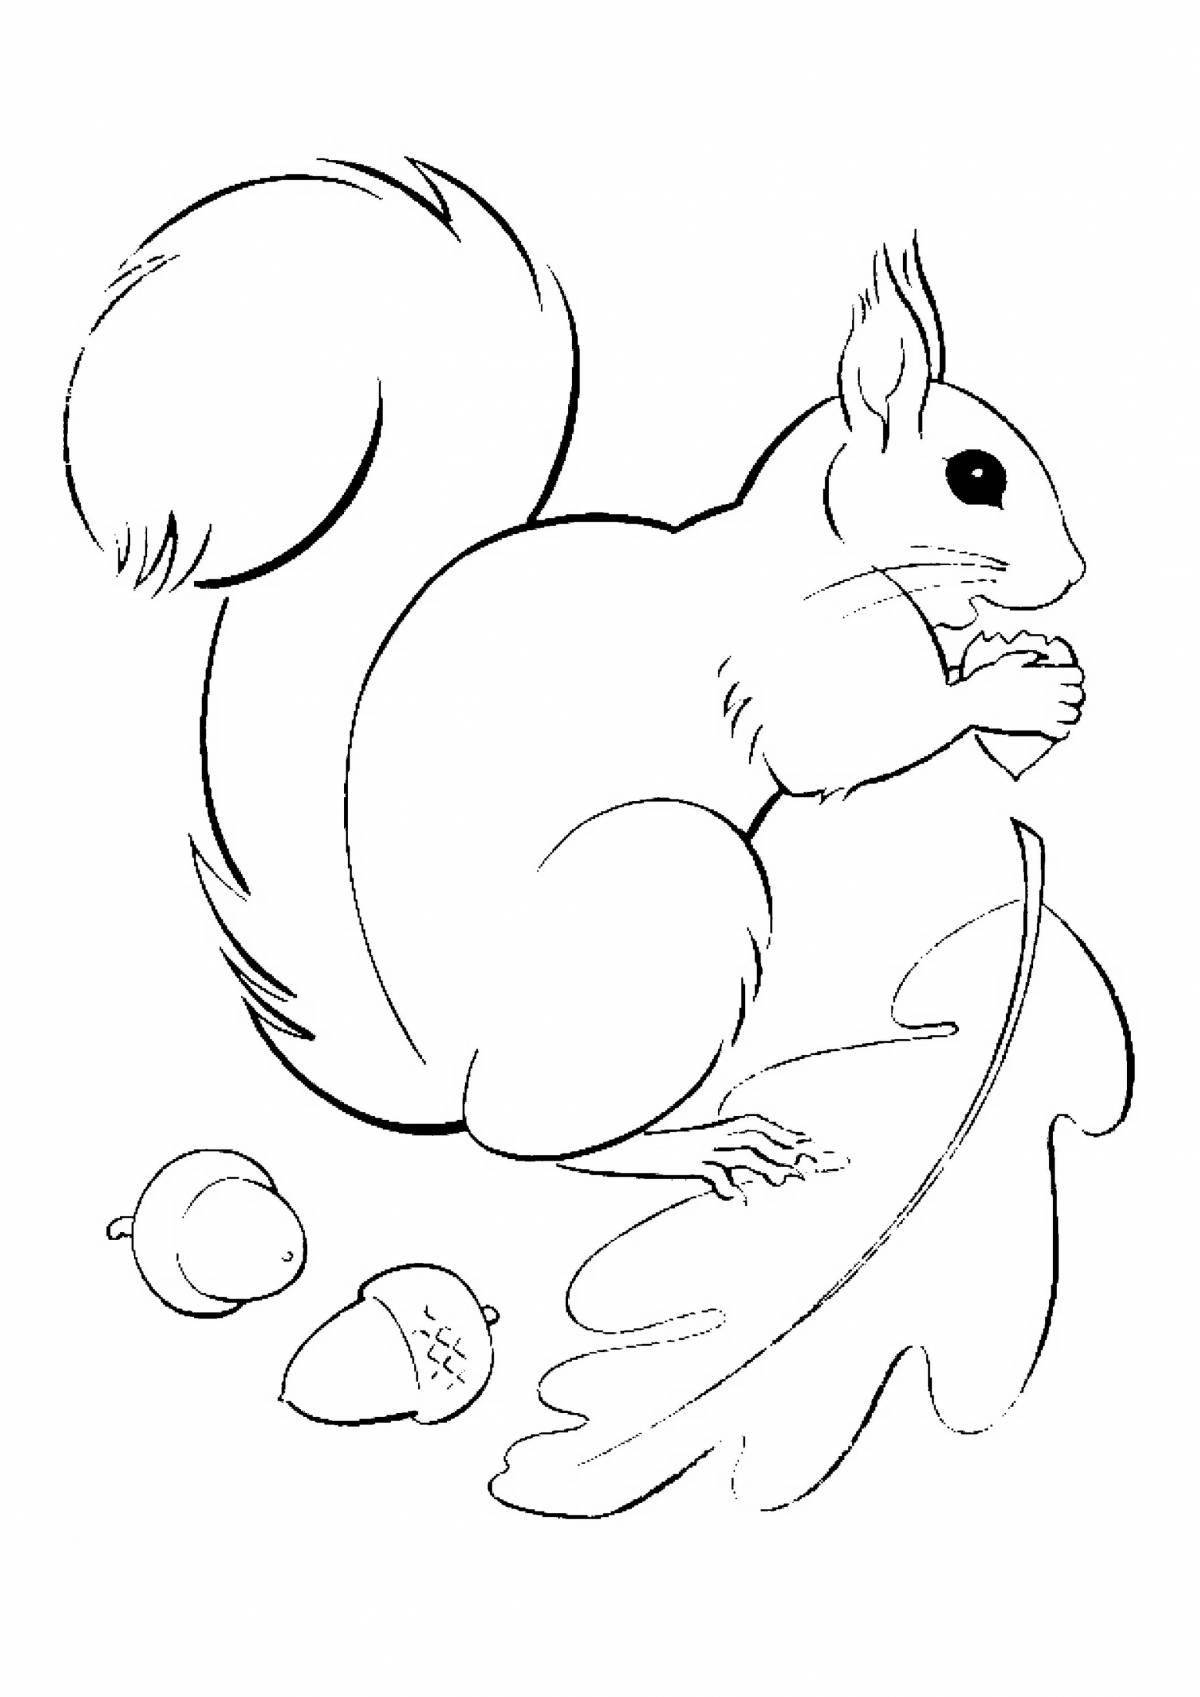 Coloring page of a sociable squirrel